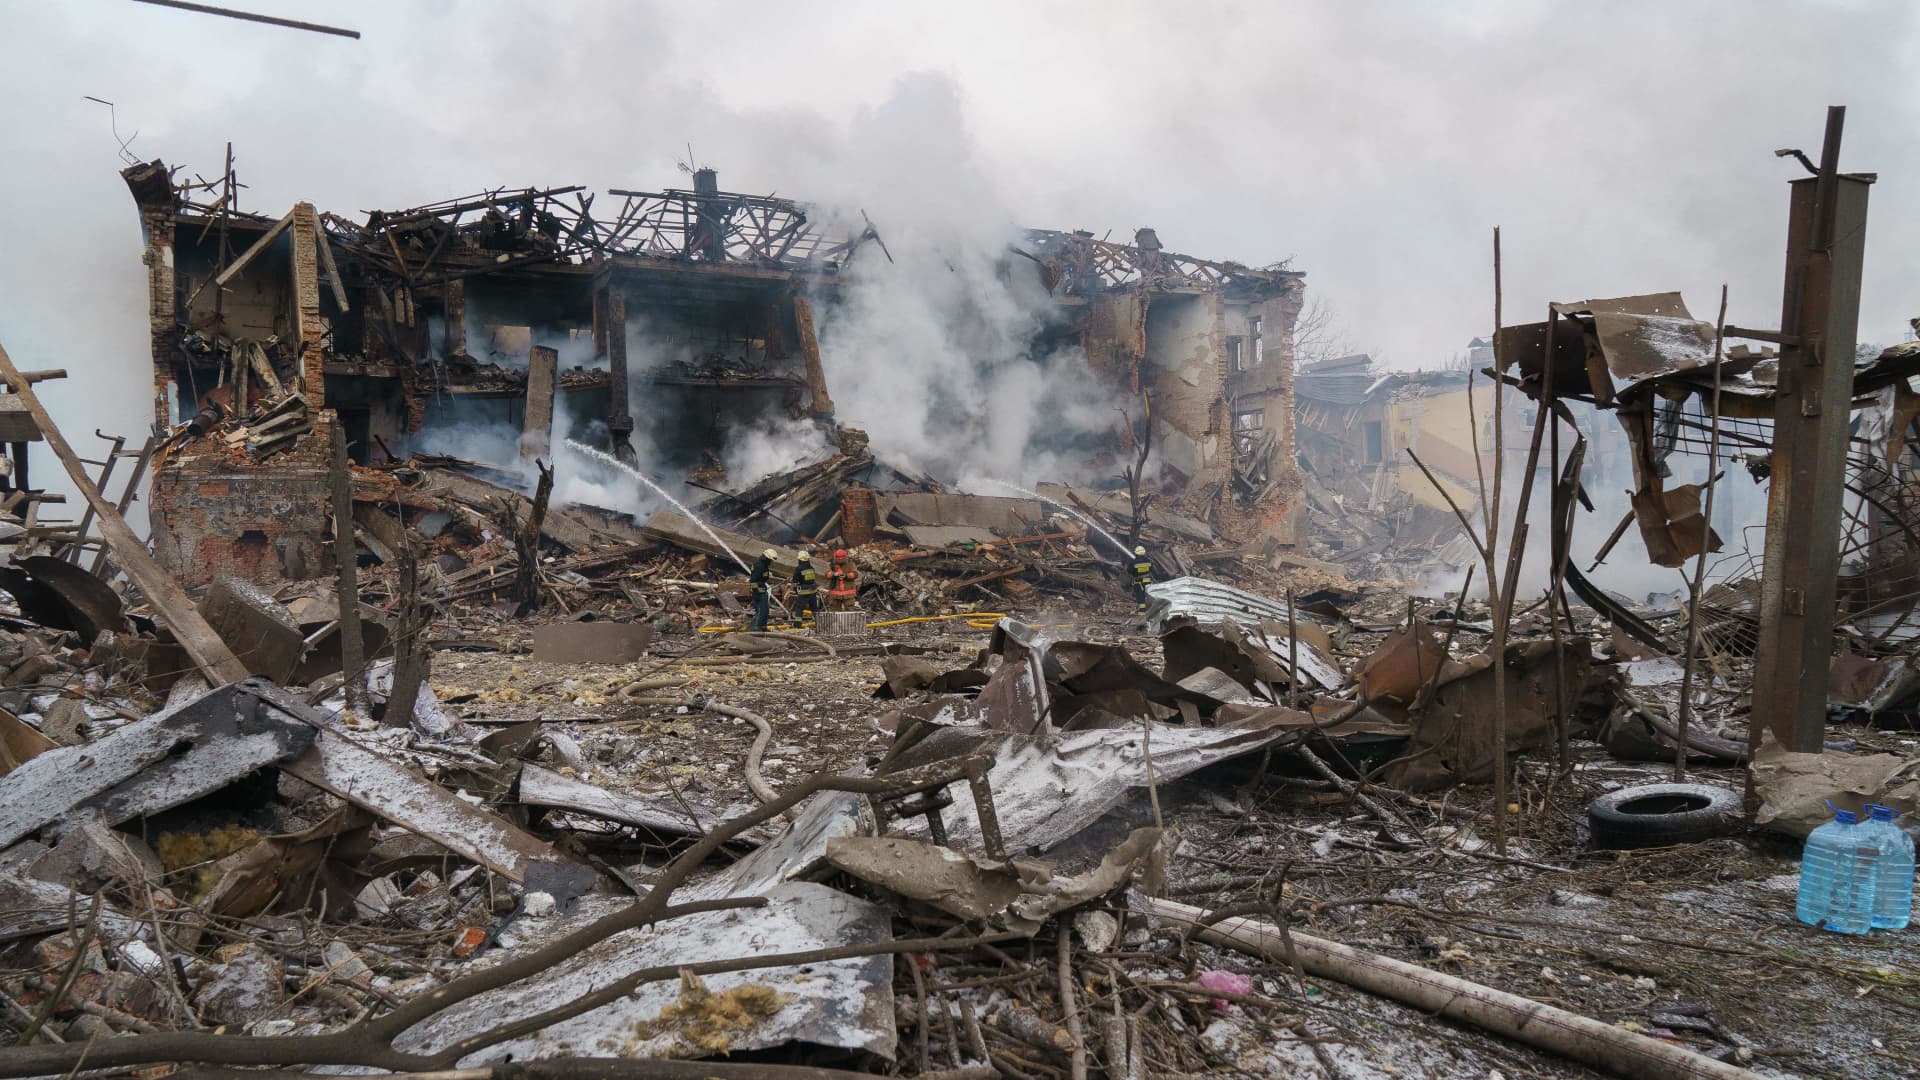 Firefighters spray water on a destroyed shoe factory following an airstrike in Dnipro on March 11, 2022.